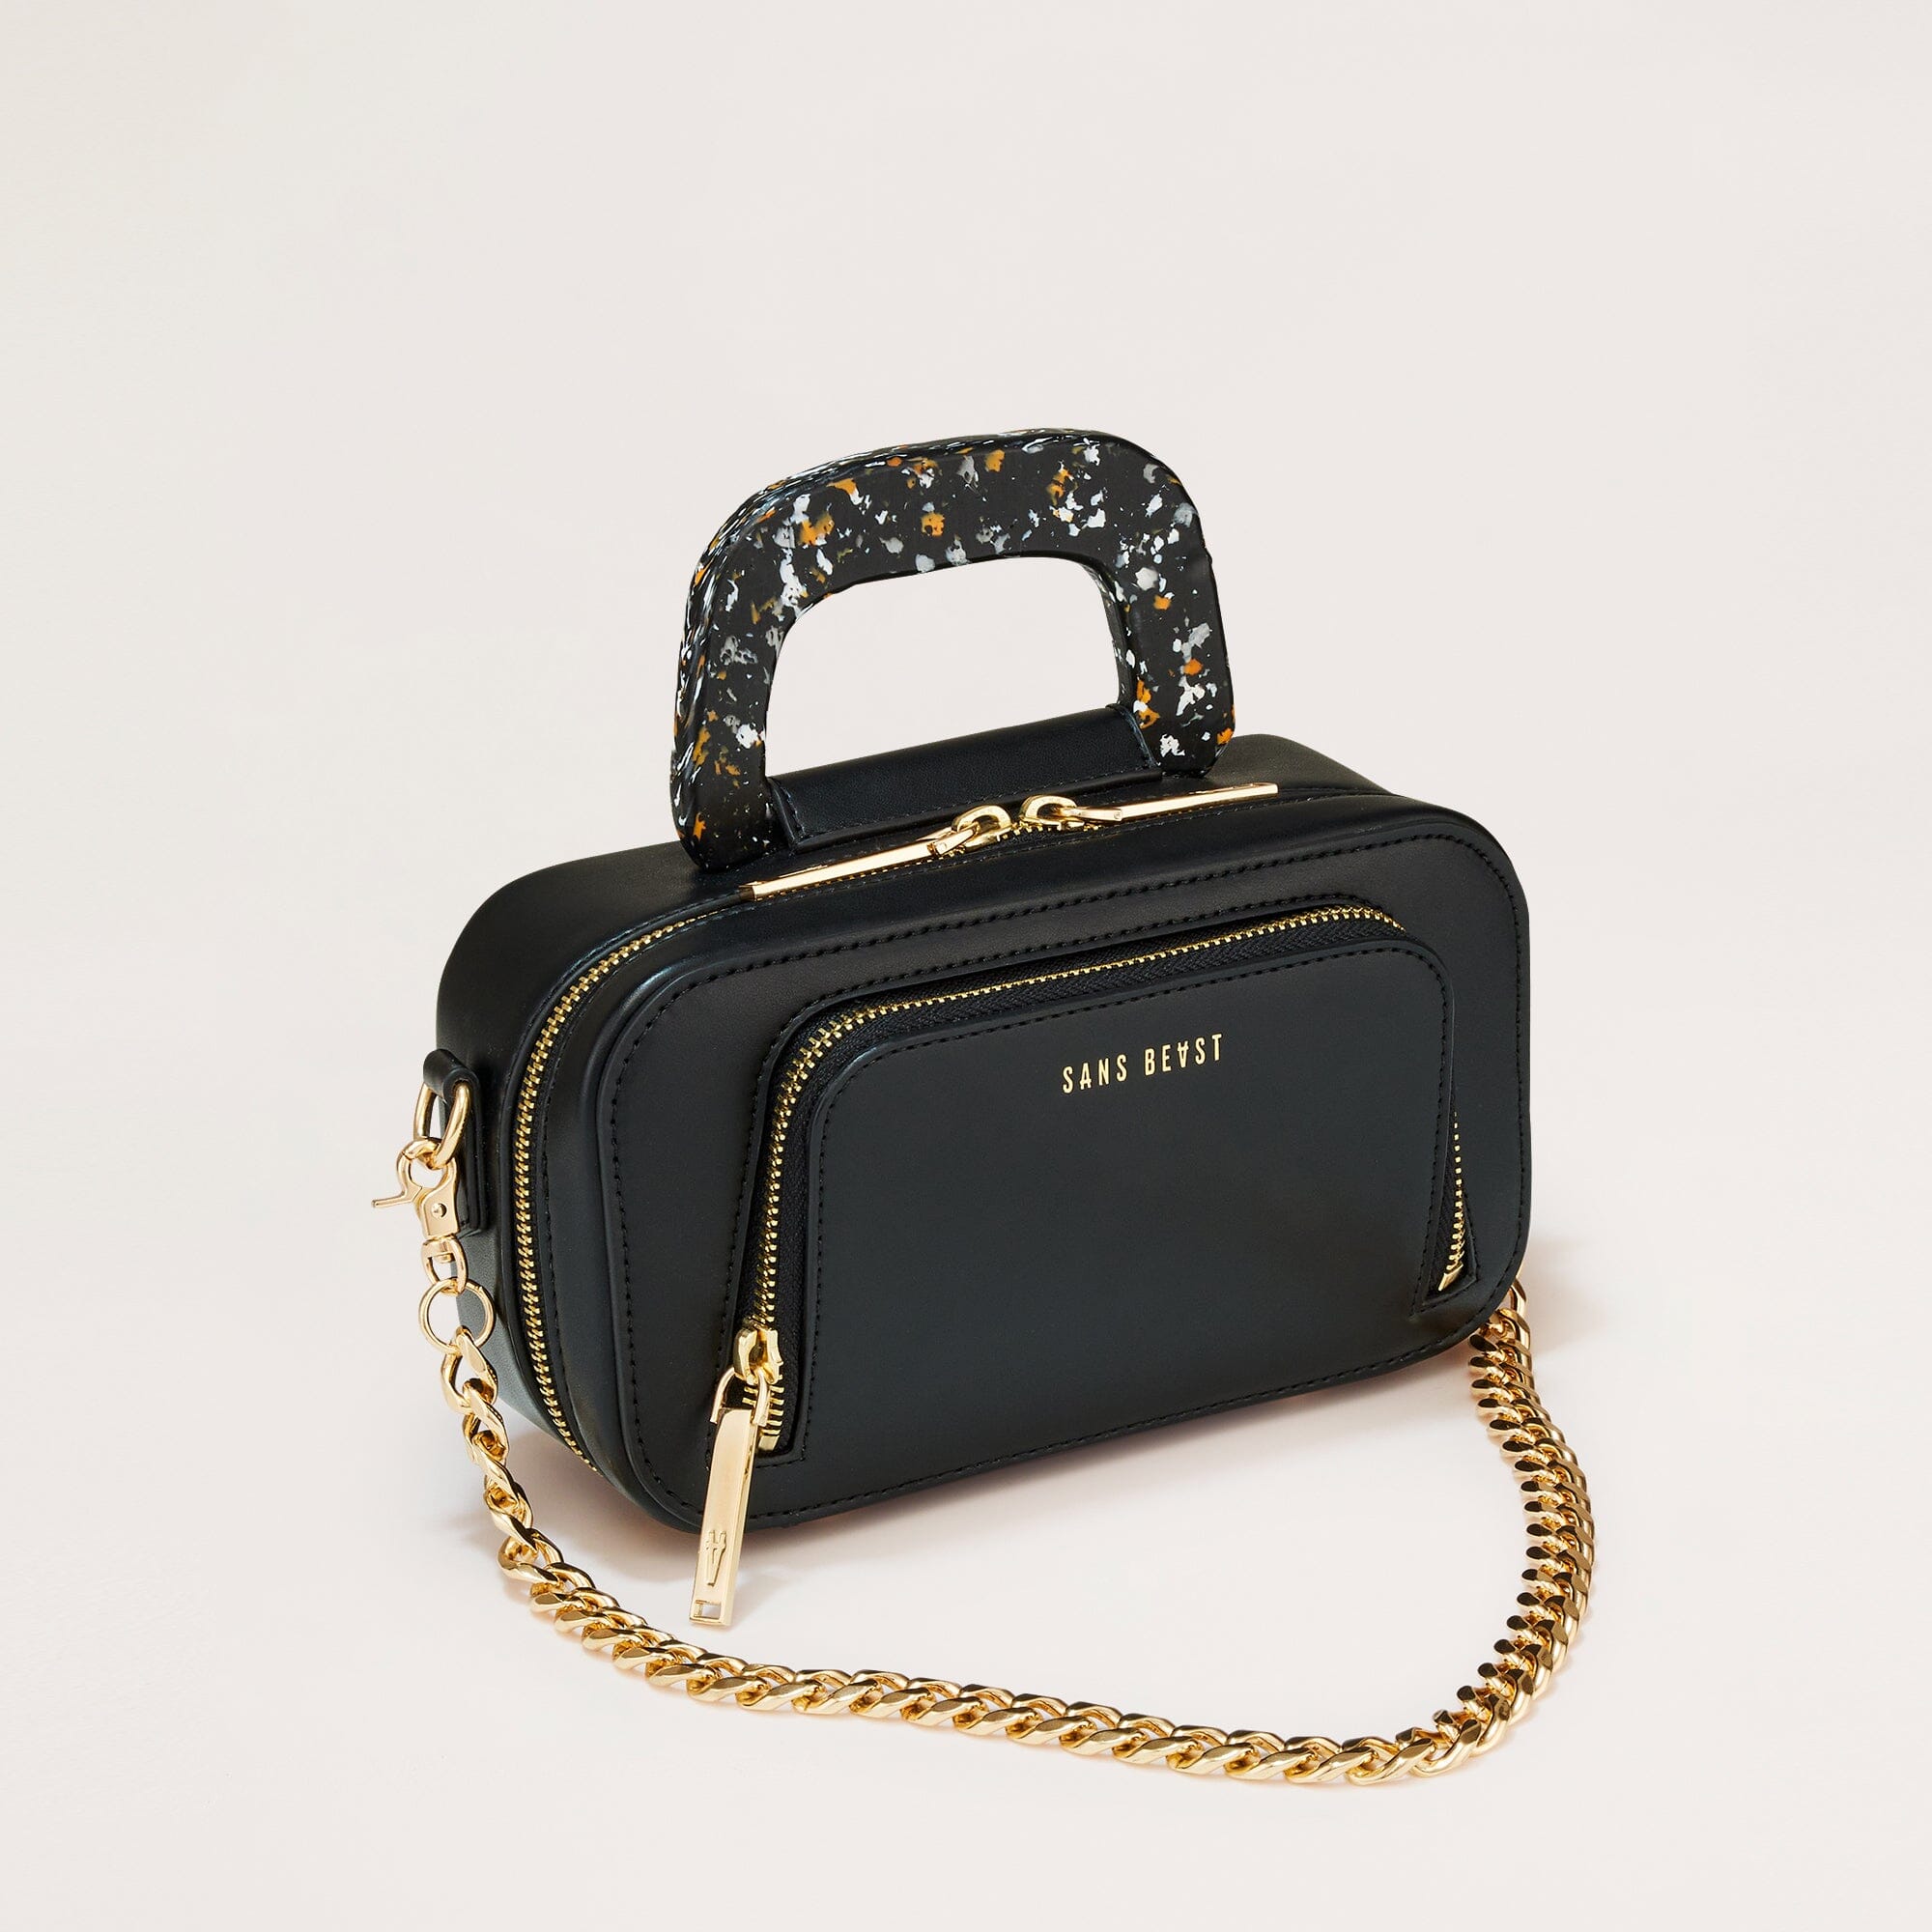 Petite Cosmos Vegan Crossbody Bag Black shown with included gold chain